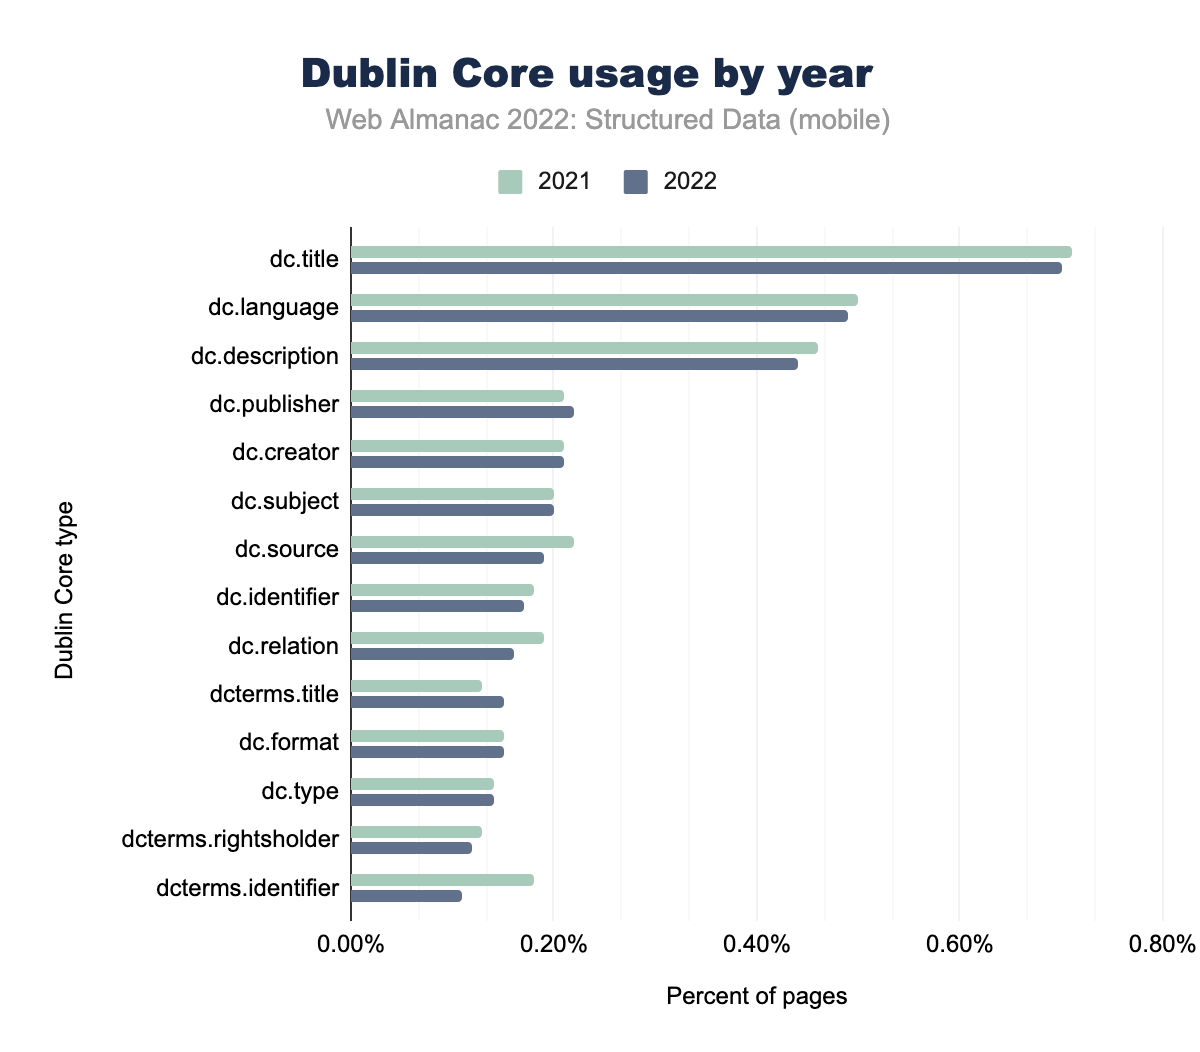 Dublin Core usage by year (mobile)